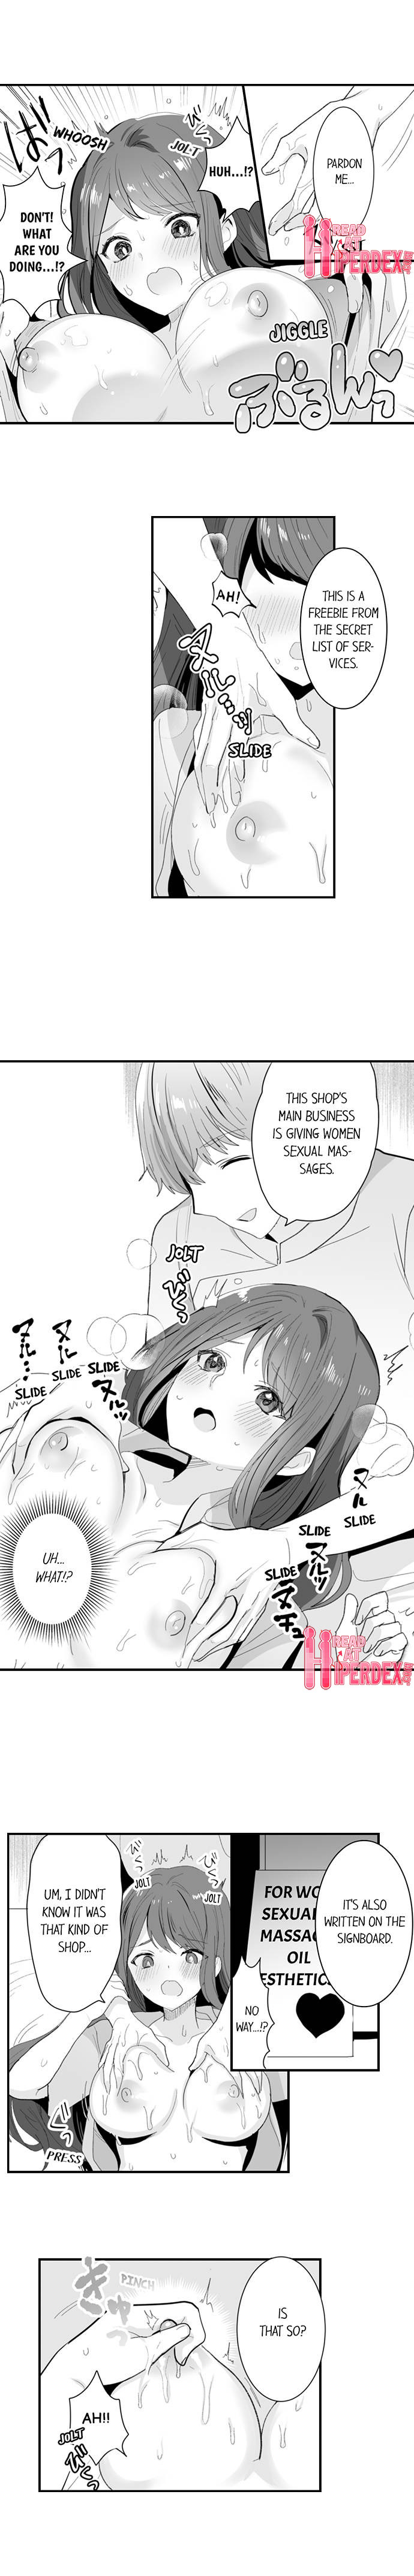 The Massage ♂♀ The Pleasure of Full Course Sex Chapter 7 - Page 4